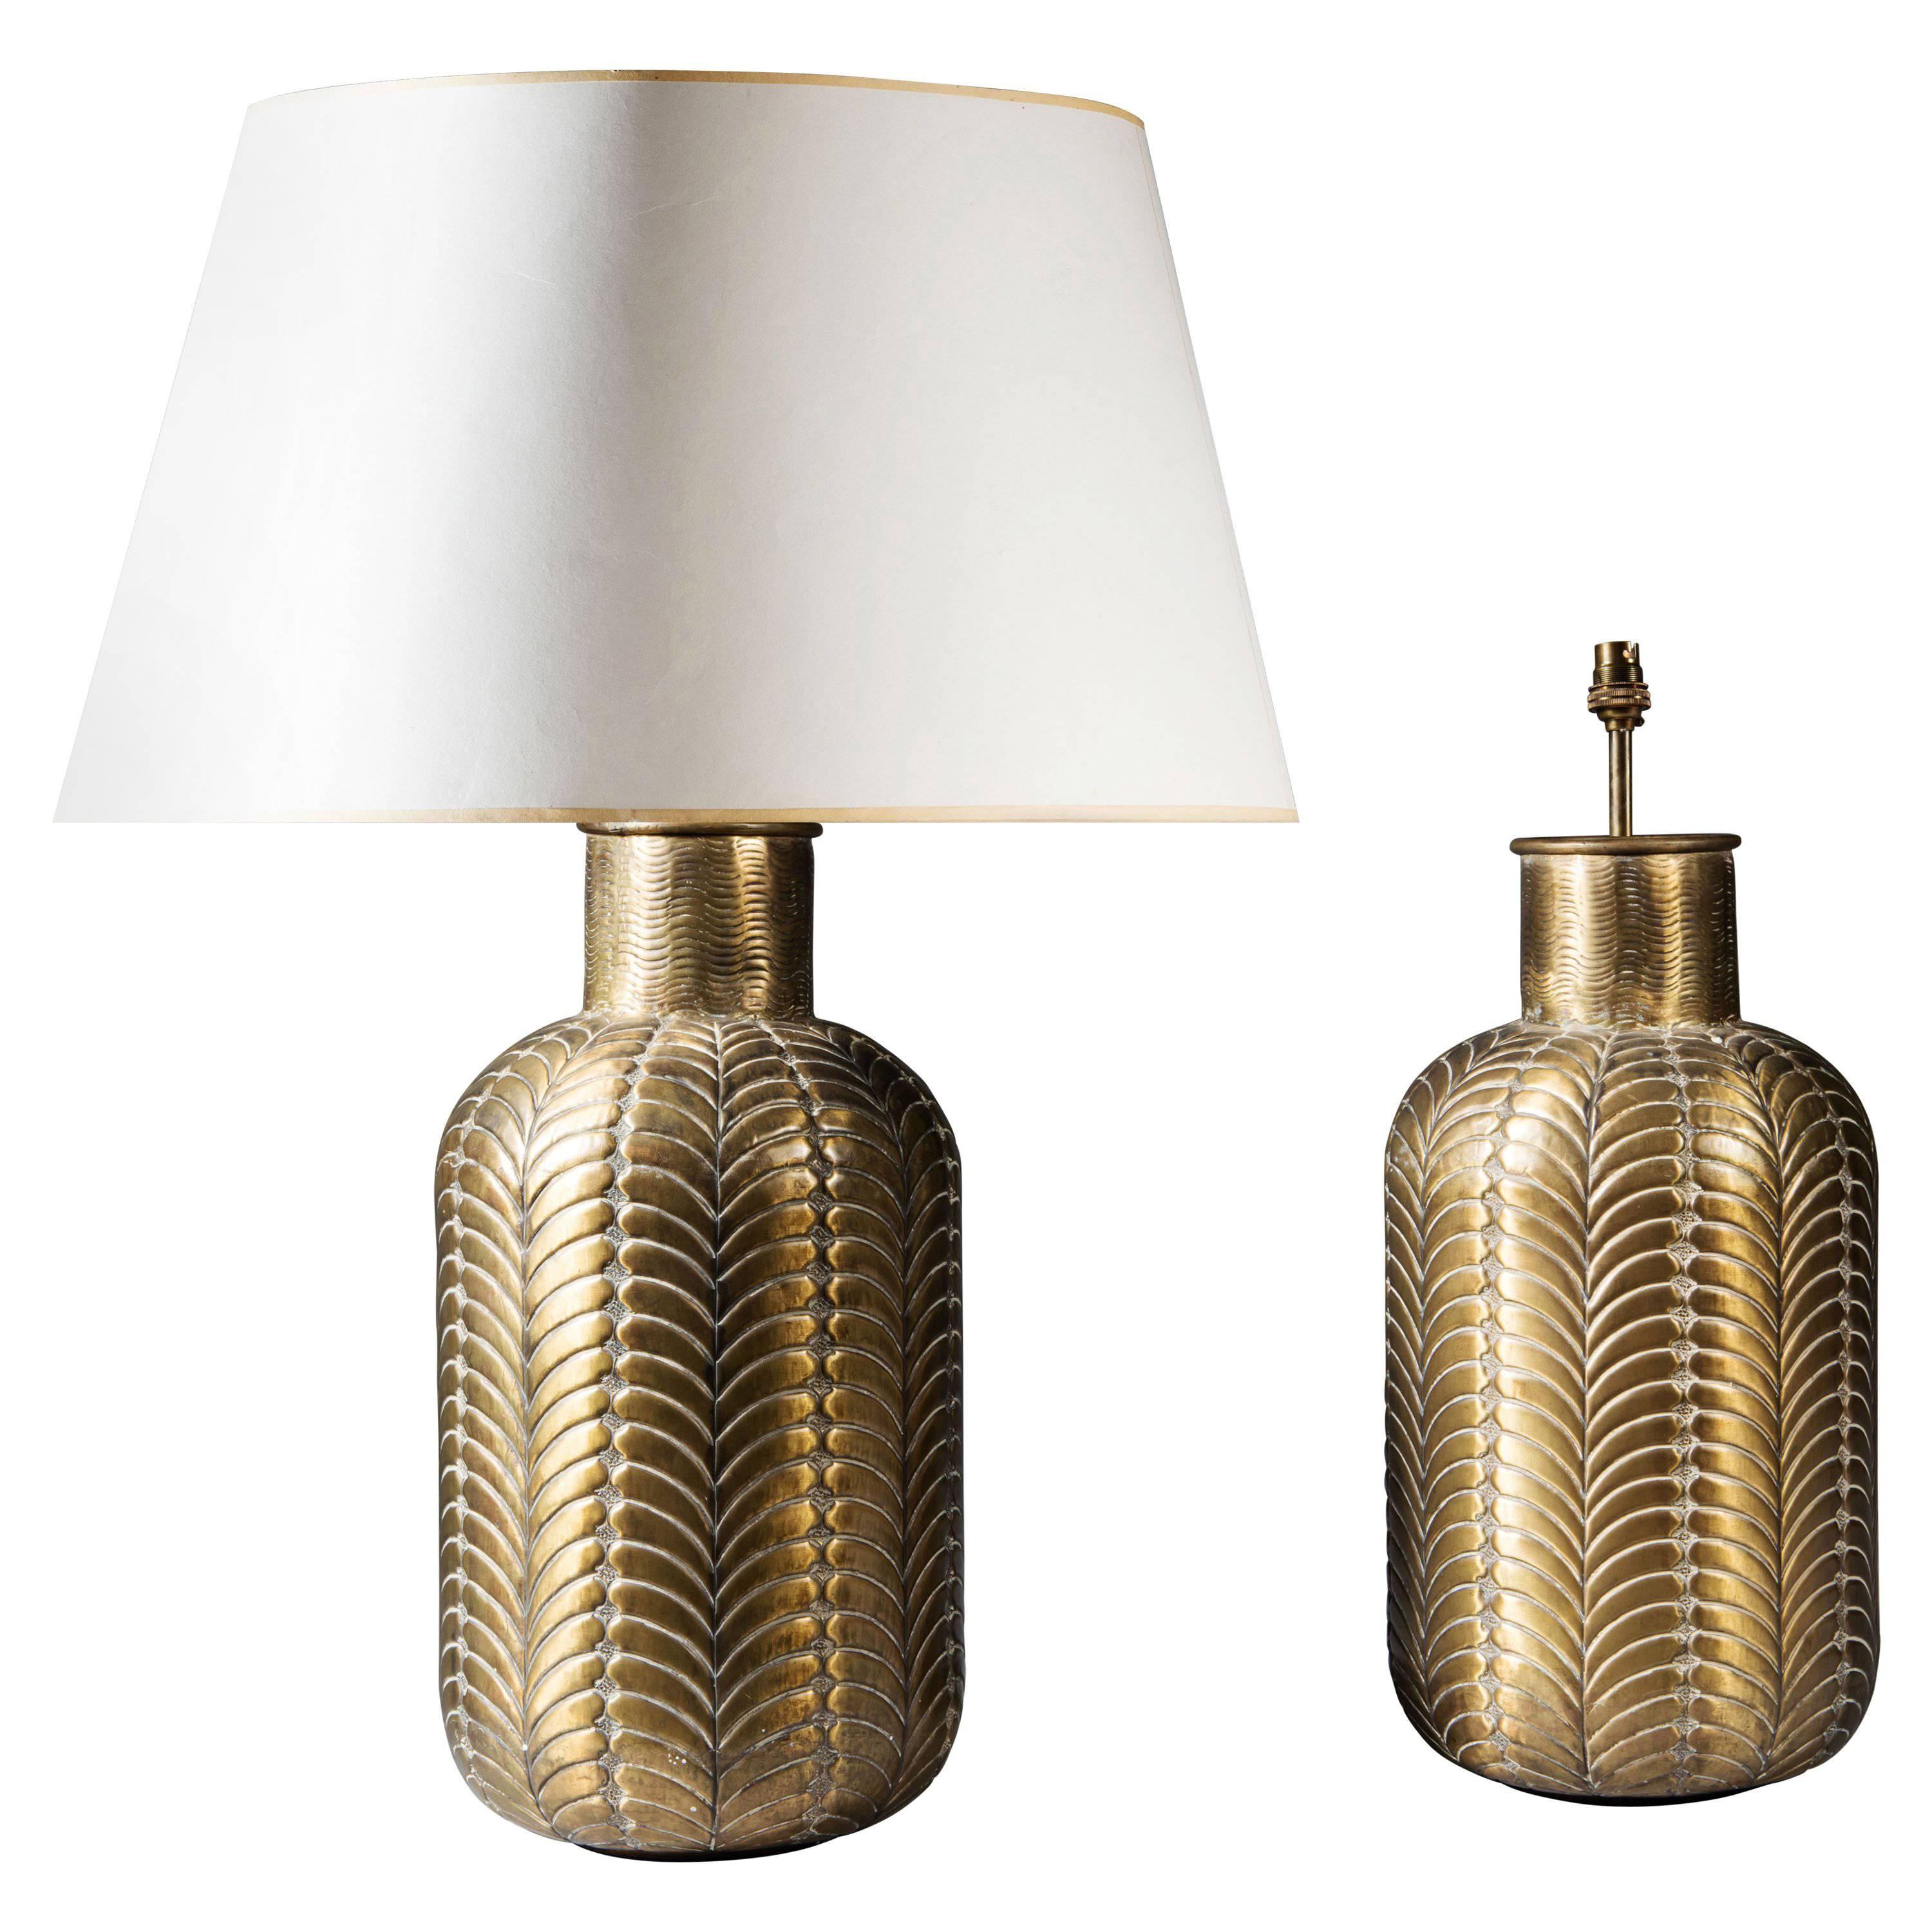 Pair of Moulded Brass Lamps